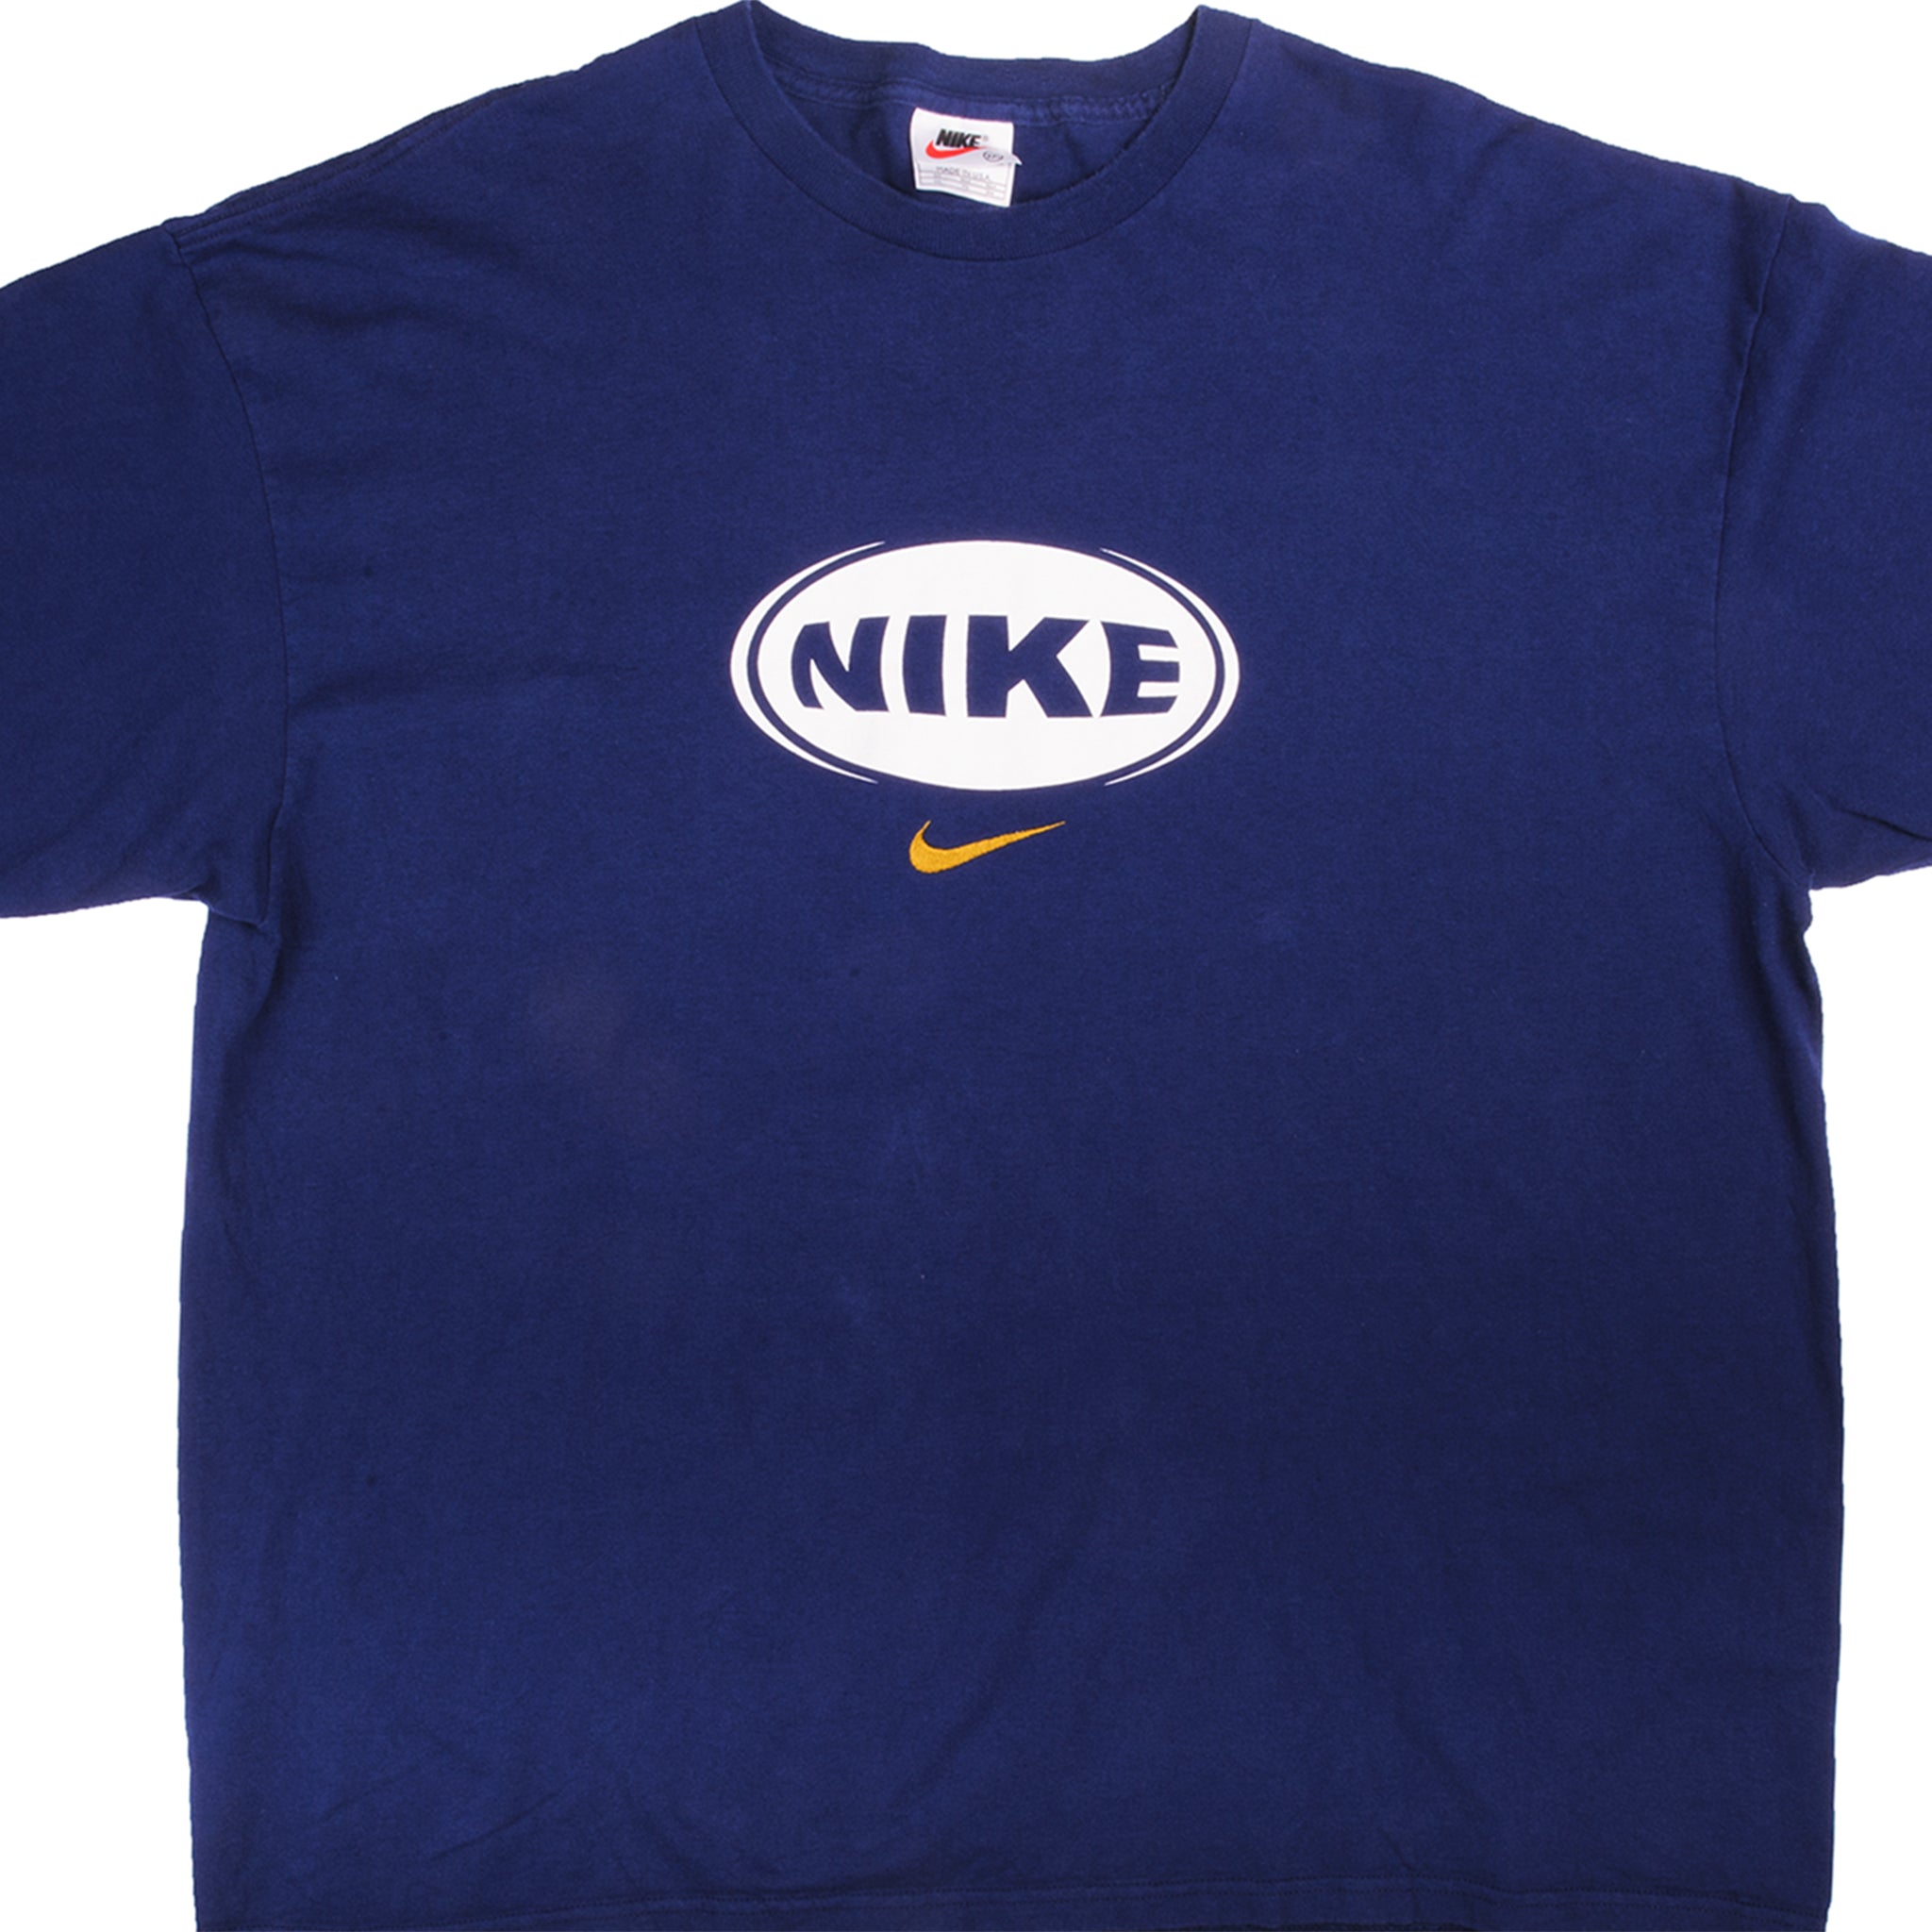 NIKE MIDDLE SWOOSH TEE SHIRT LATE 90S SIZE 2XL MADE IN USA Vintage usa